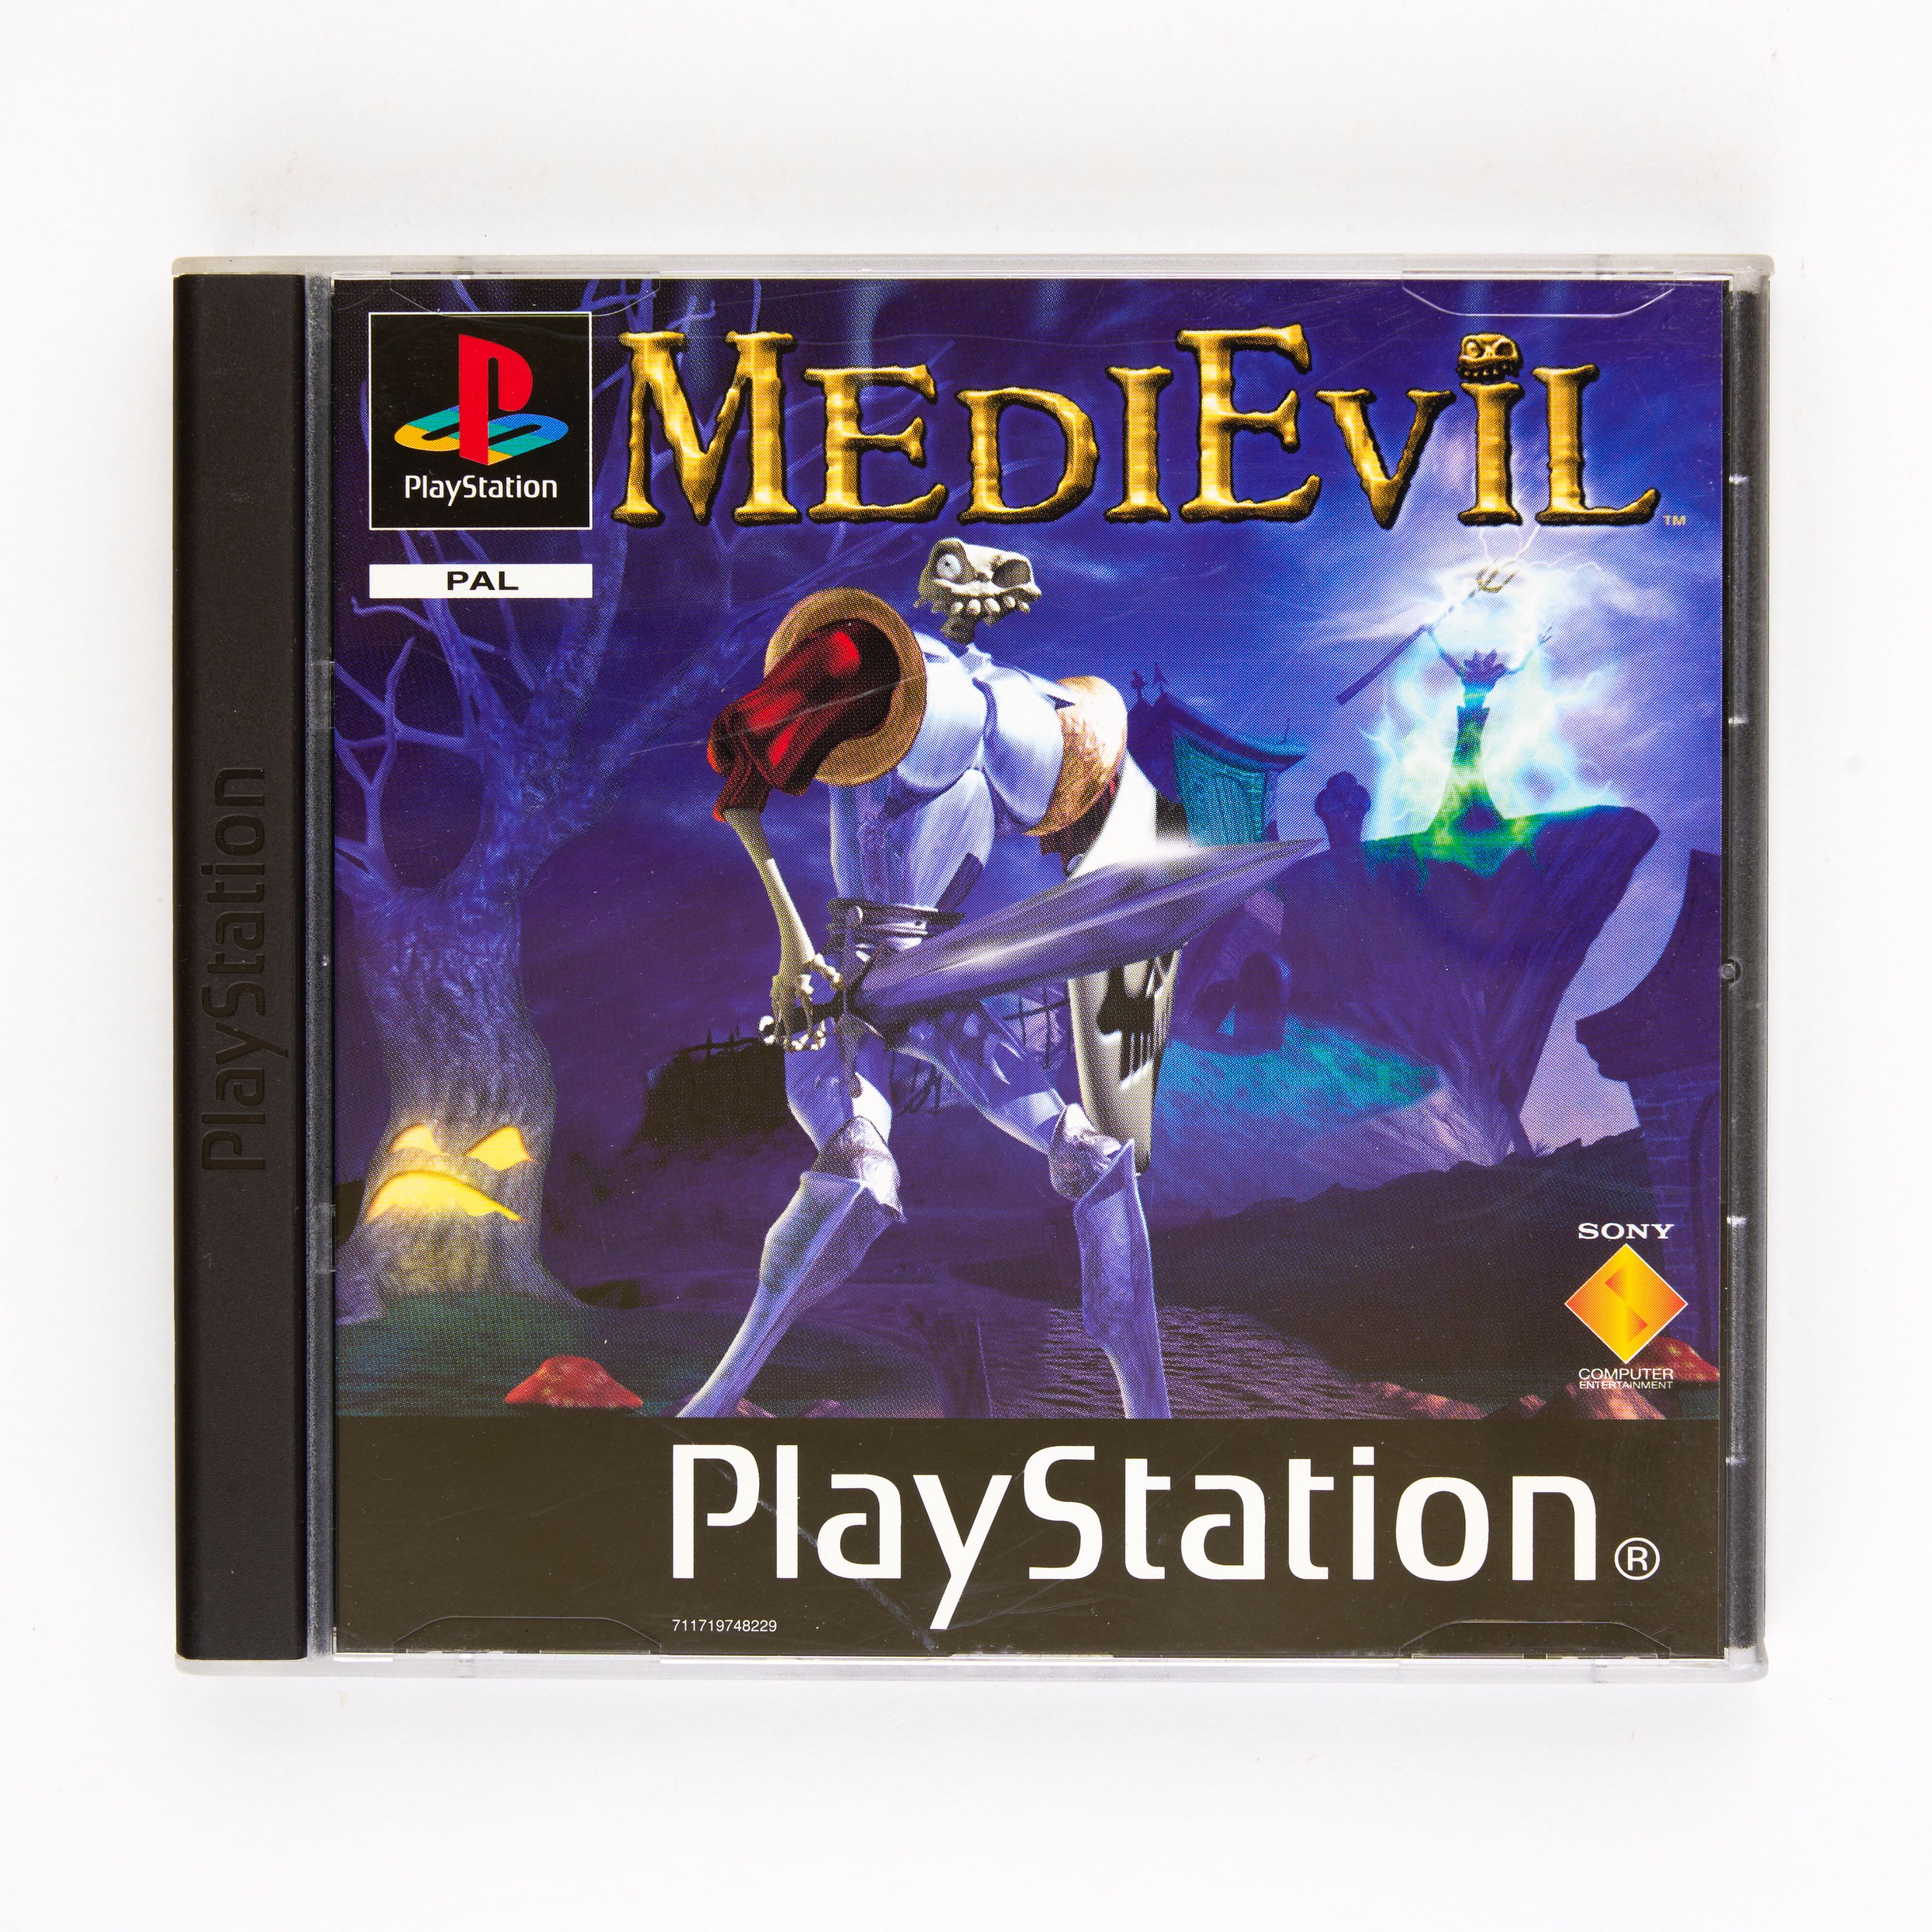 Sony - Medievil PAL - Playstation - Complete In Box